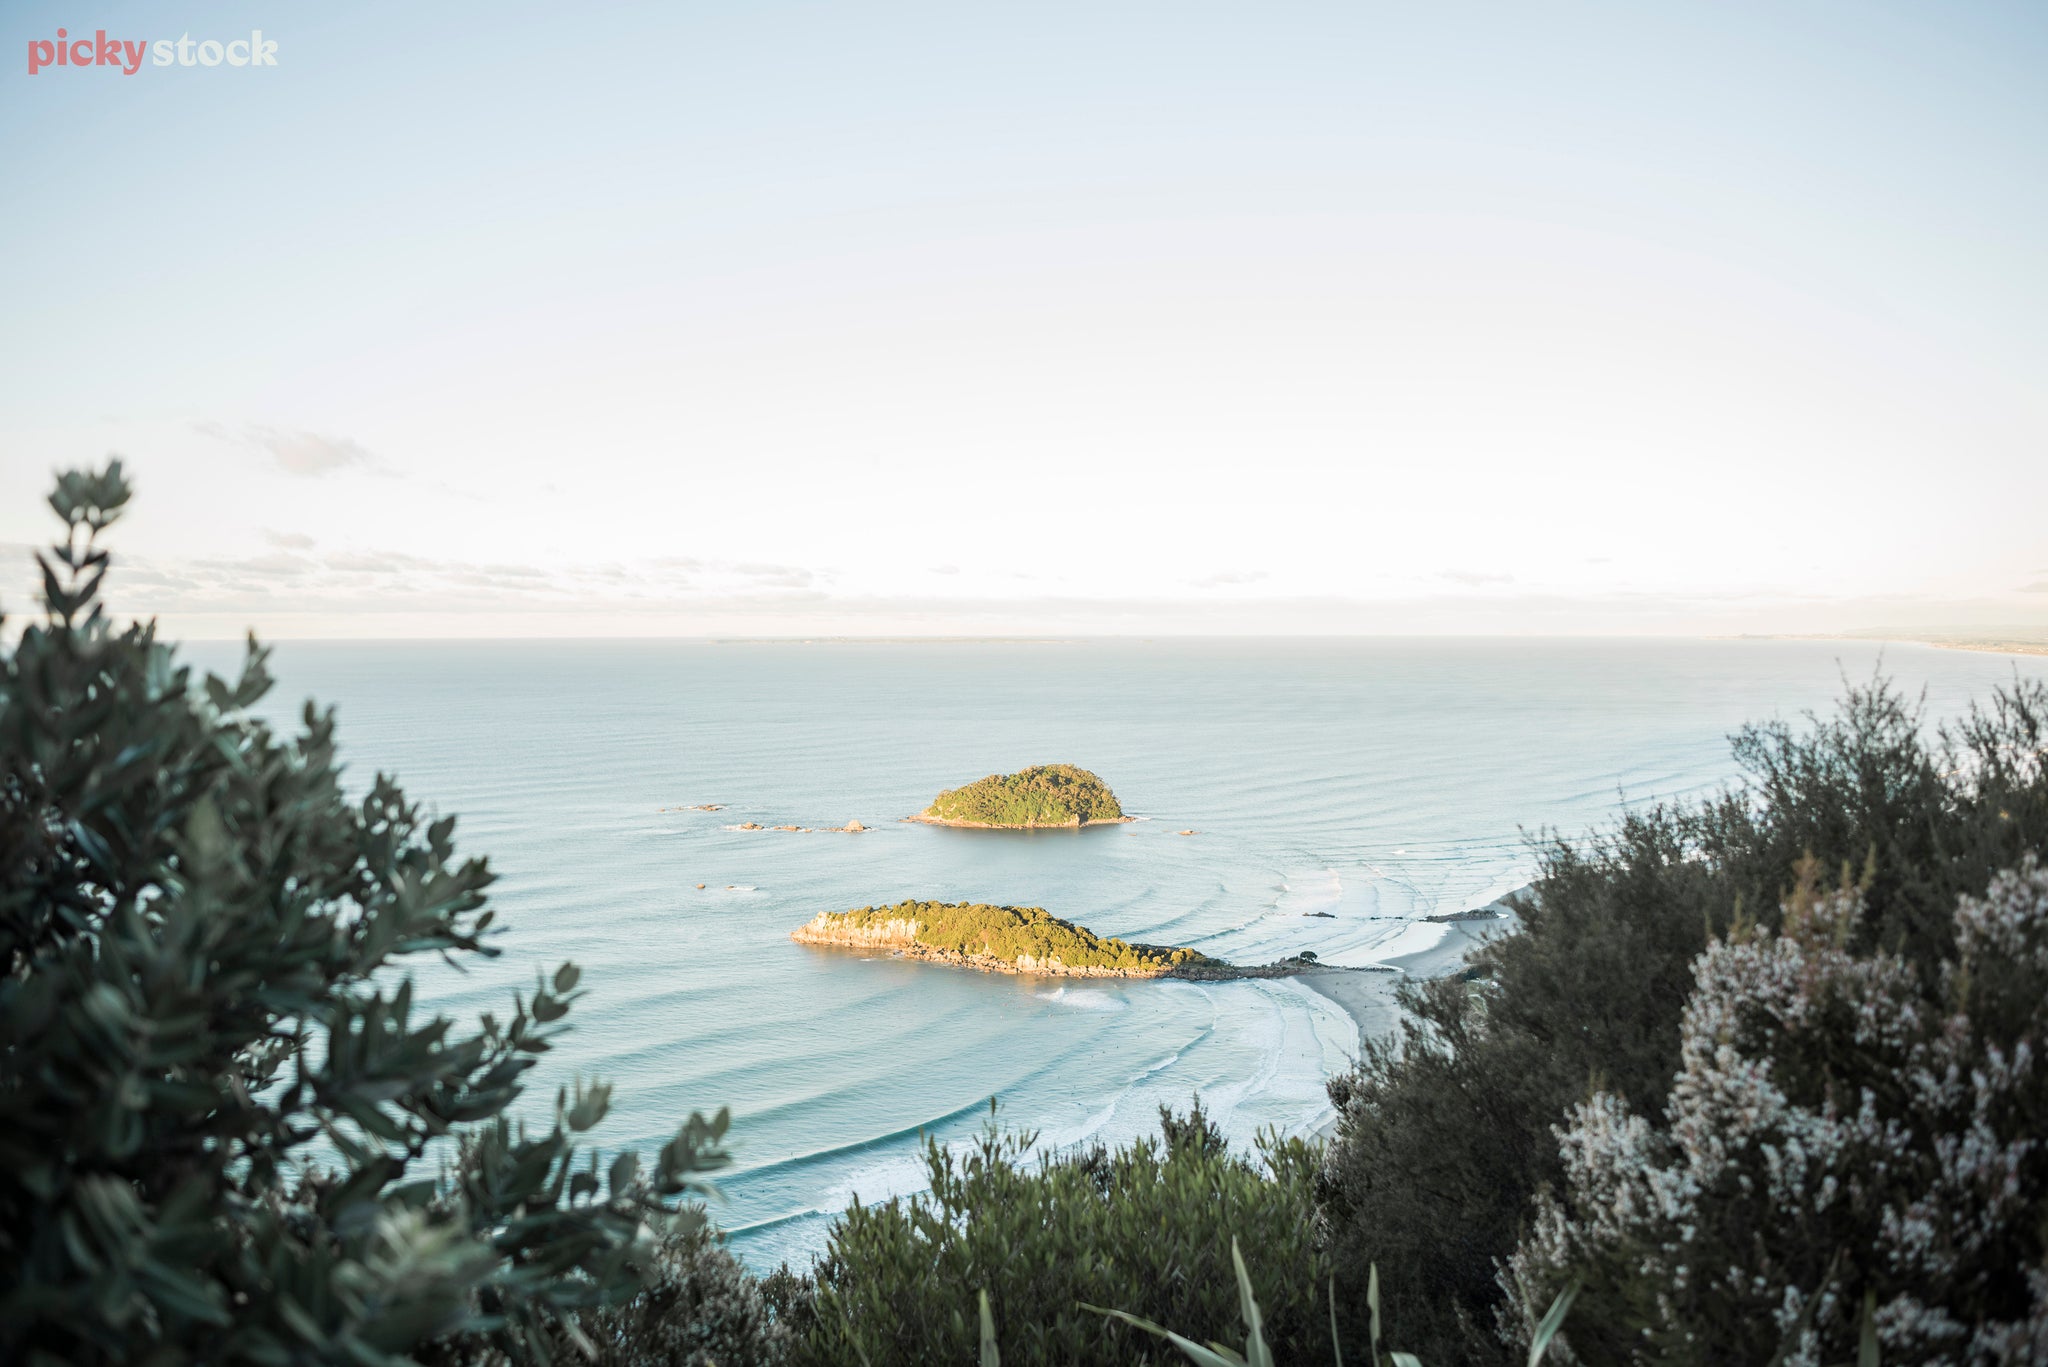 Two islands ist on the ocean waves close to shore. The sky is a white blue and the view is framed by manuka and pohutukawa